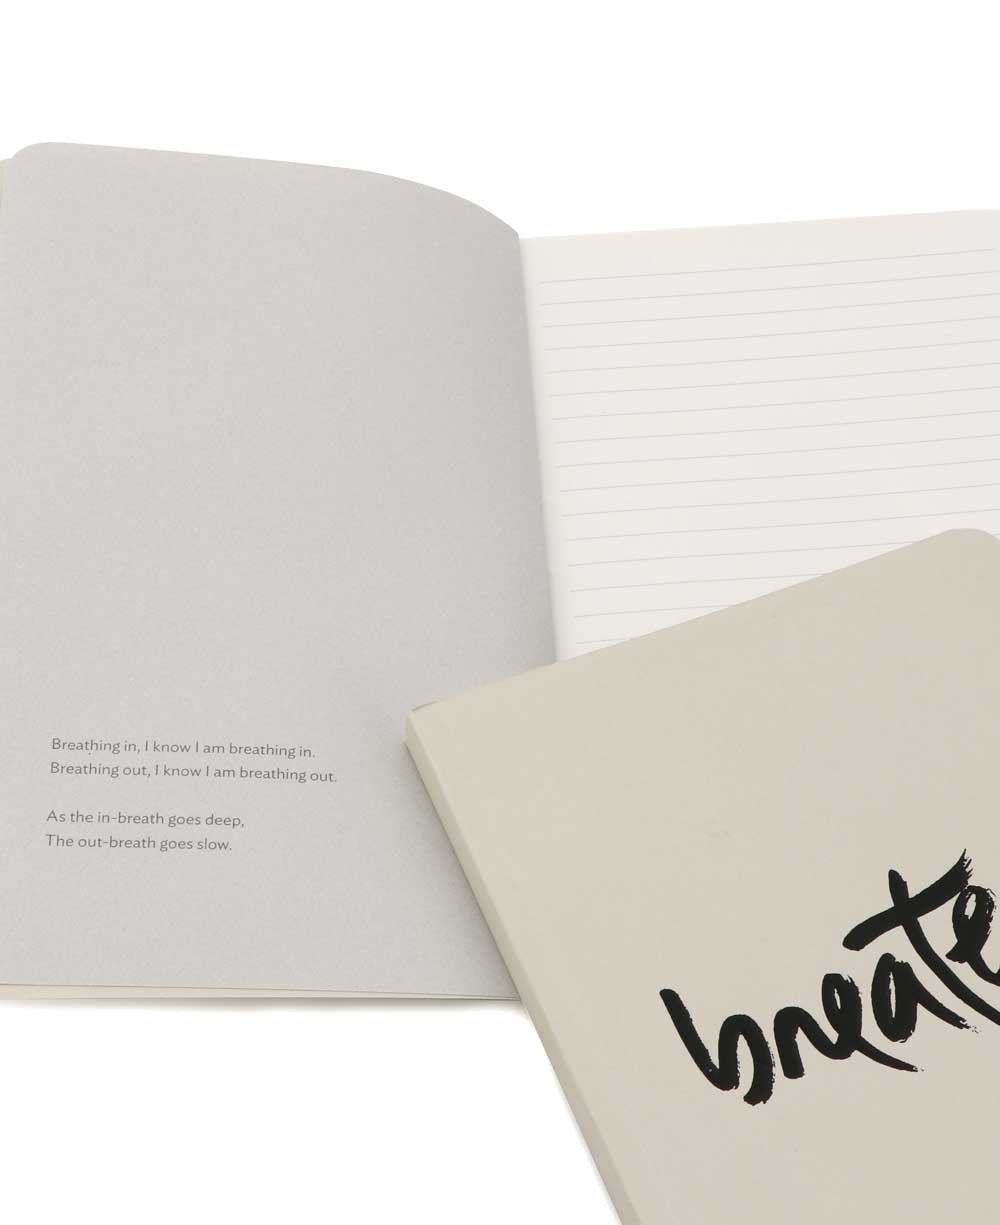 Breathe Meditation Journal, Thich Nhat Hanh - Notebooks & Notepads